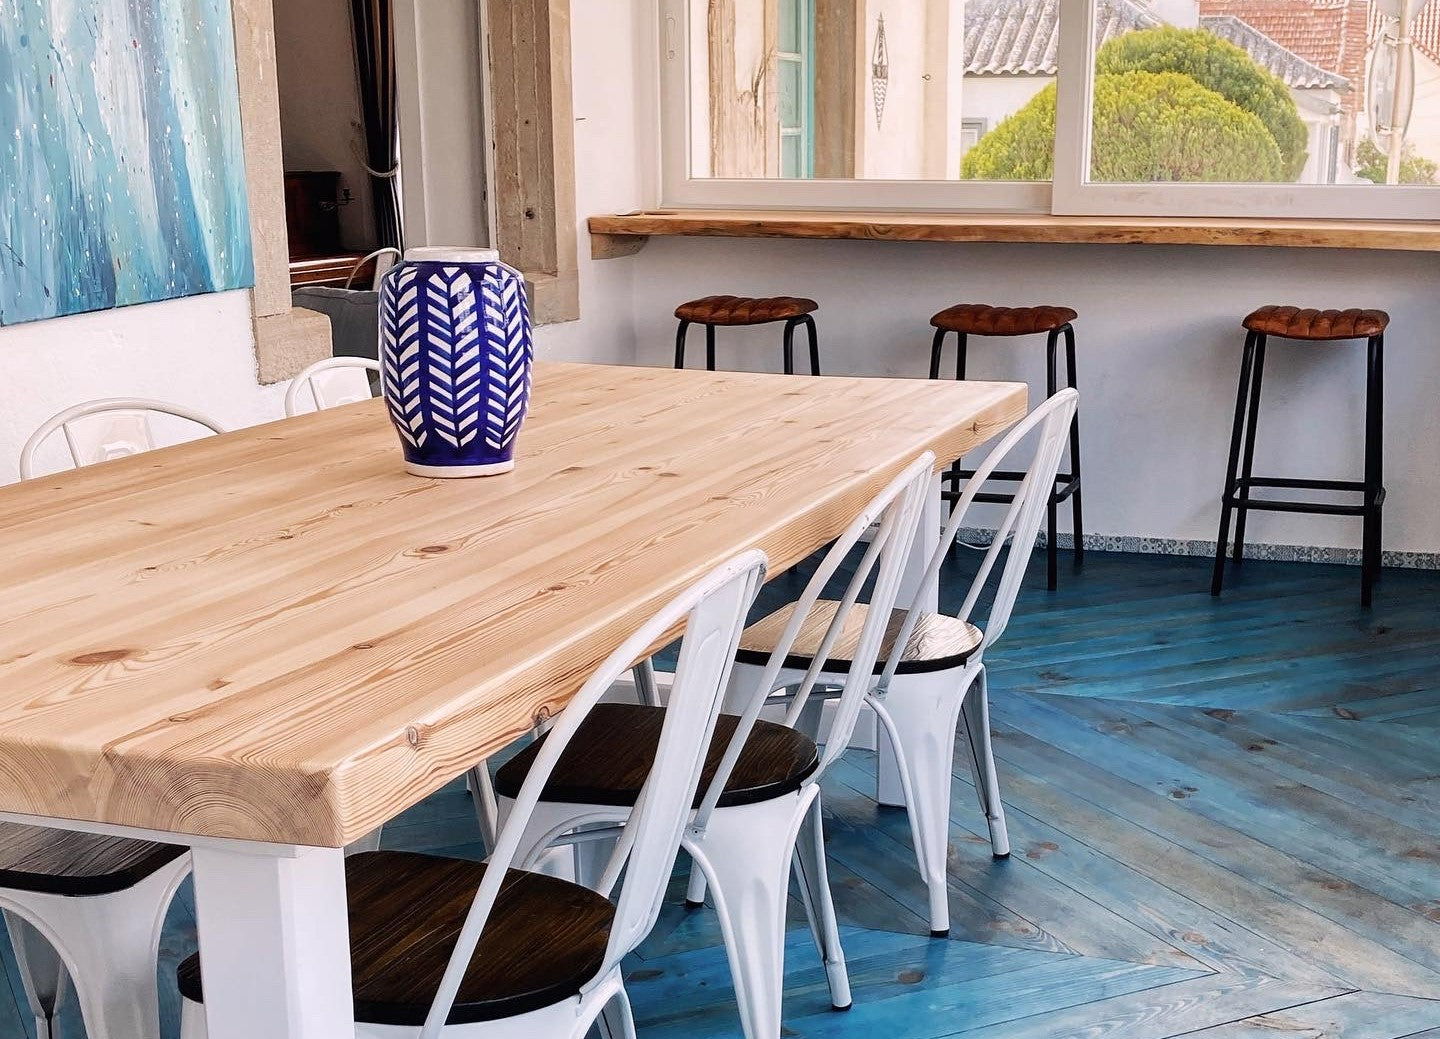 A dining table with six chairs sit atop a blue chevron floor.